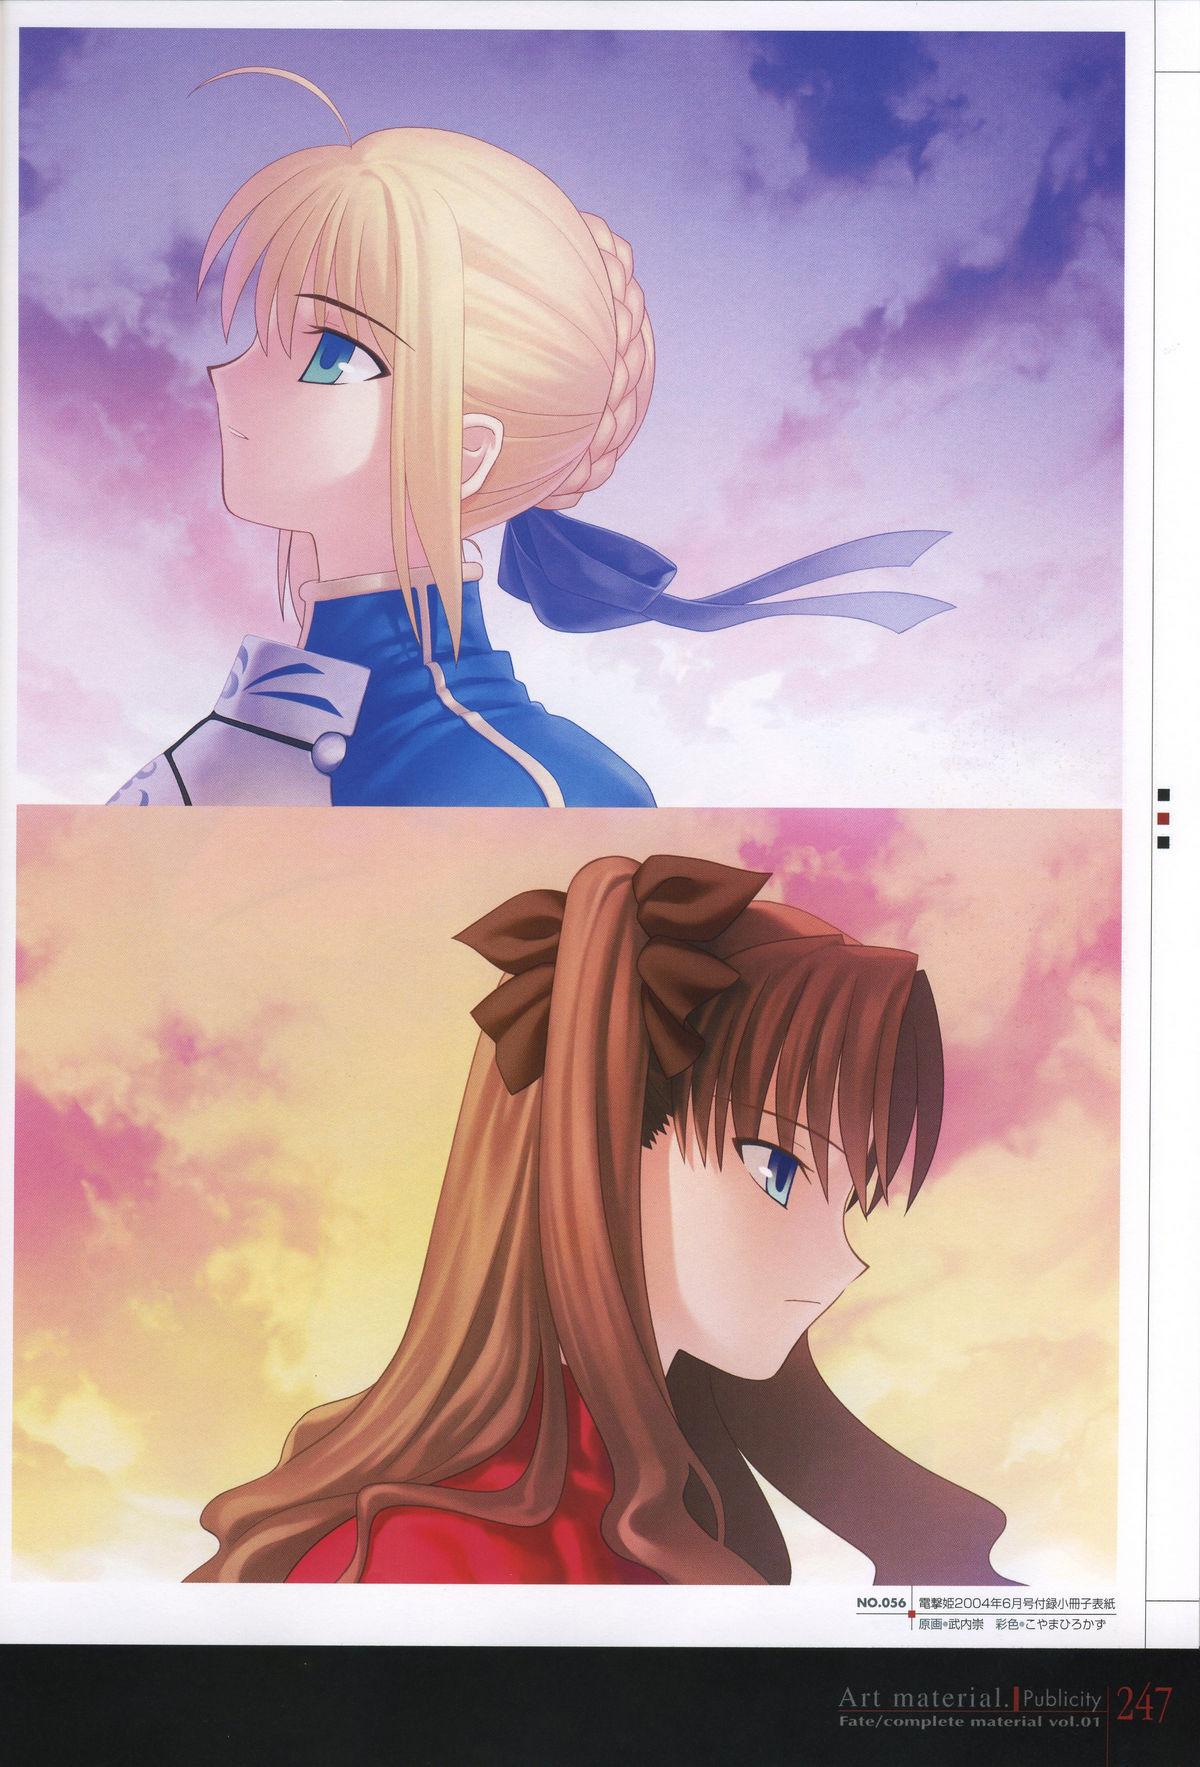 Fate/complete material I - Art material. 251